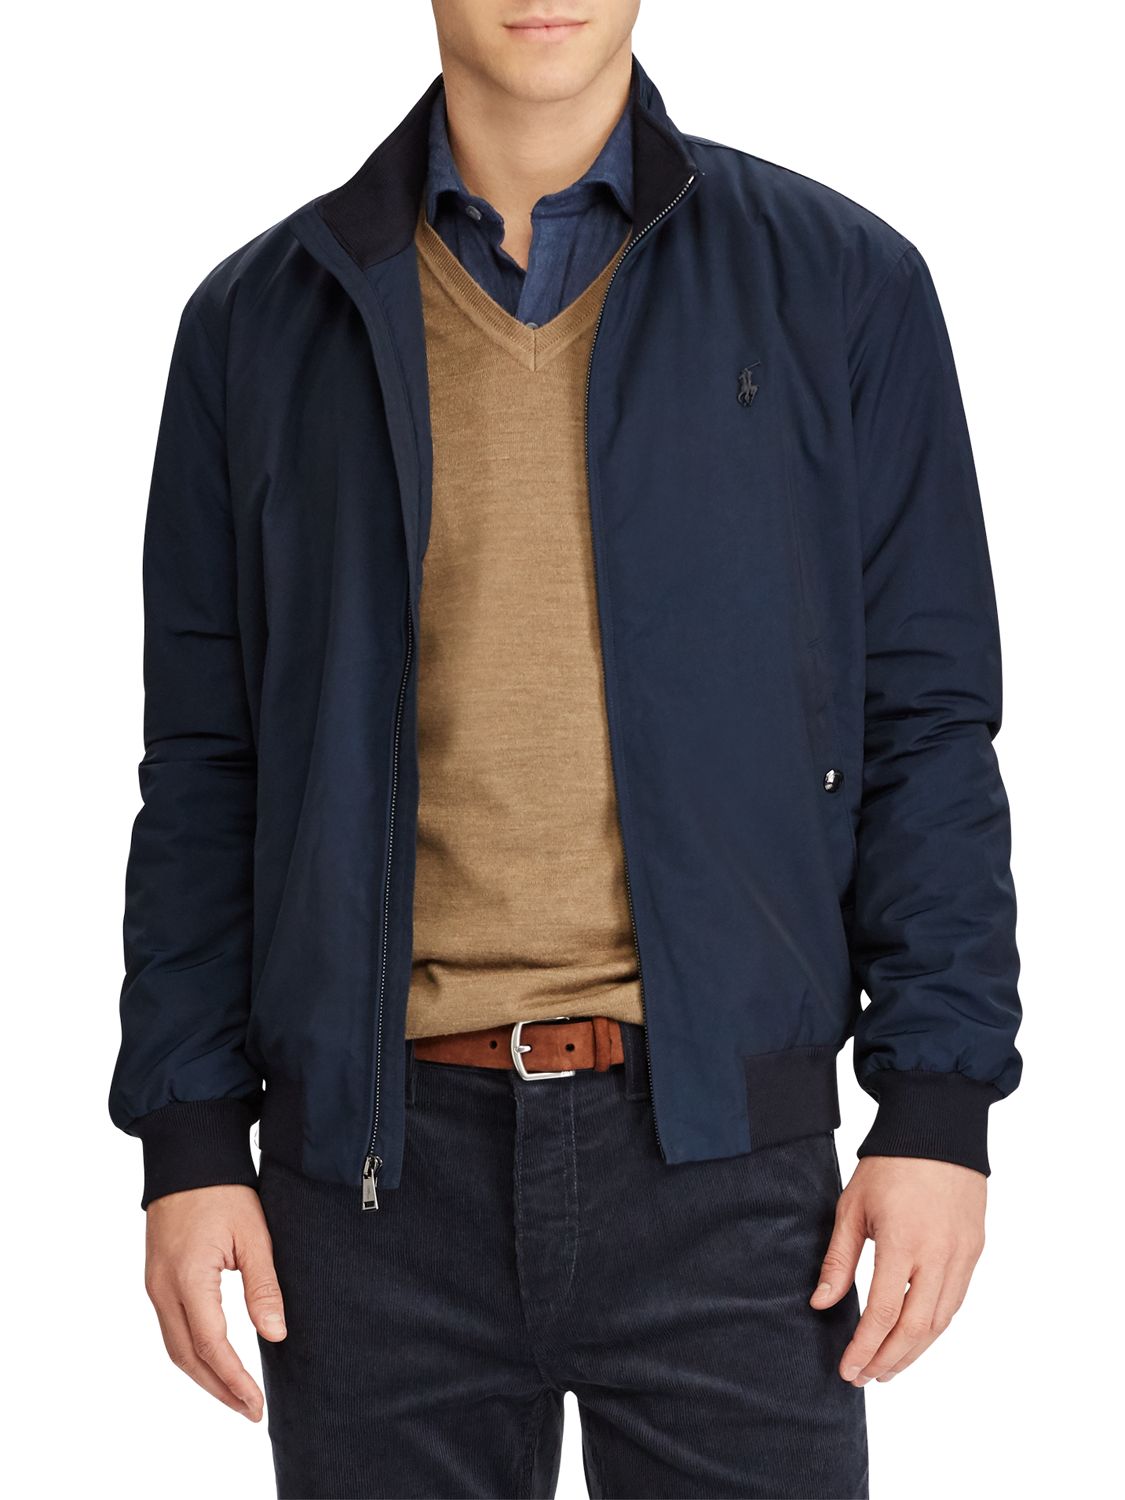 Polo Ralph Lauren Southport Poly Fill Jacket at John Lewis & Partners